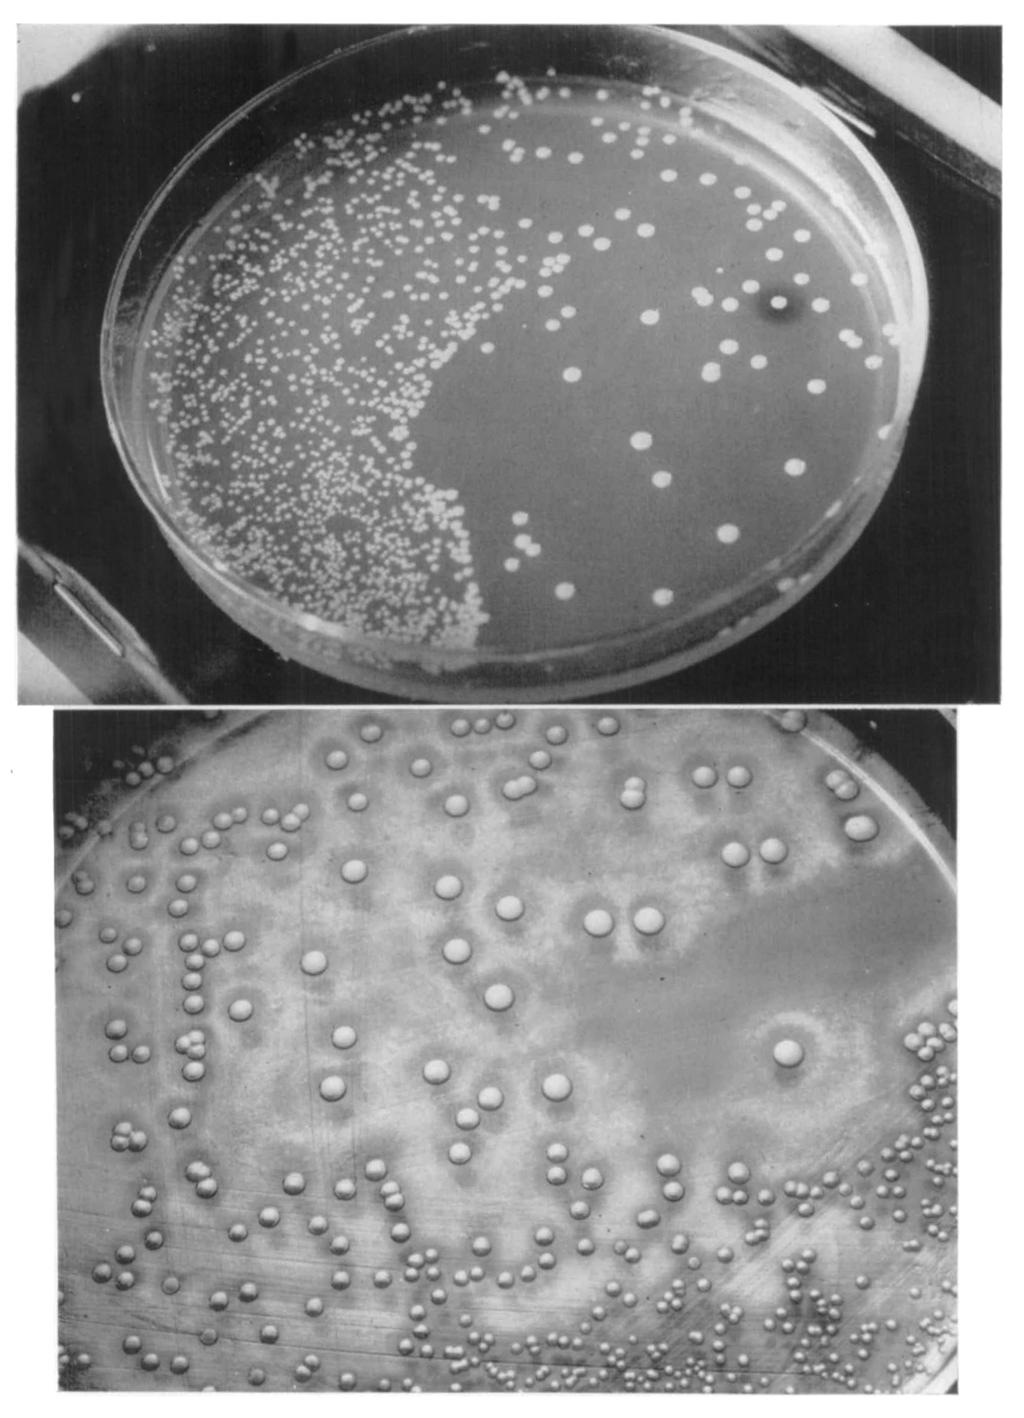 Phage types of acid and lipase producers were identical: 52/52A/80. FIG. 4 (lower). SMPA with fat emulsion. S. aureus incubated for 4S hr.